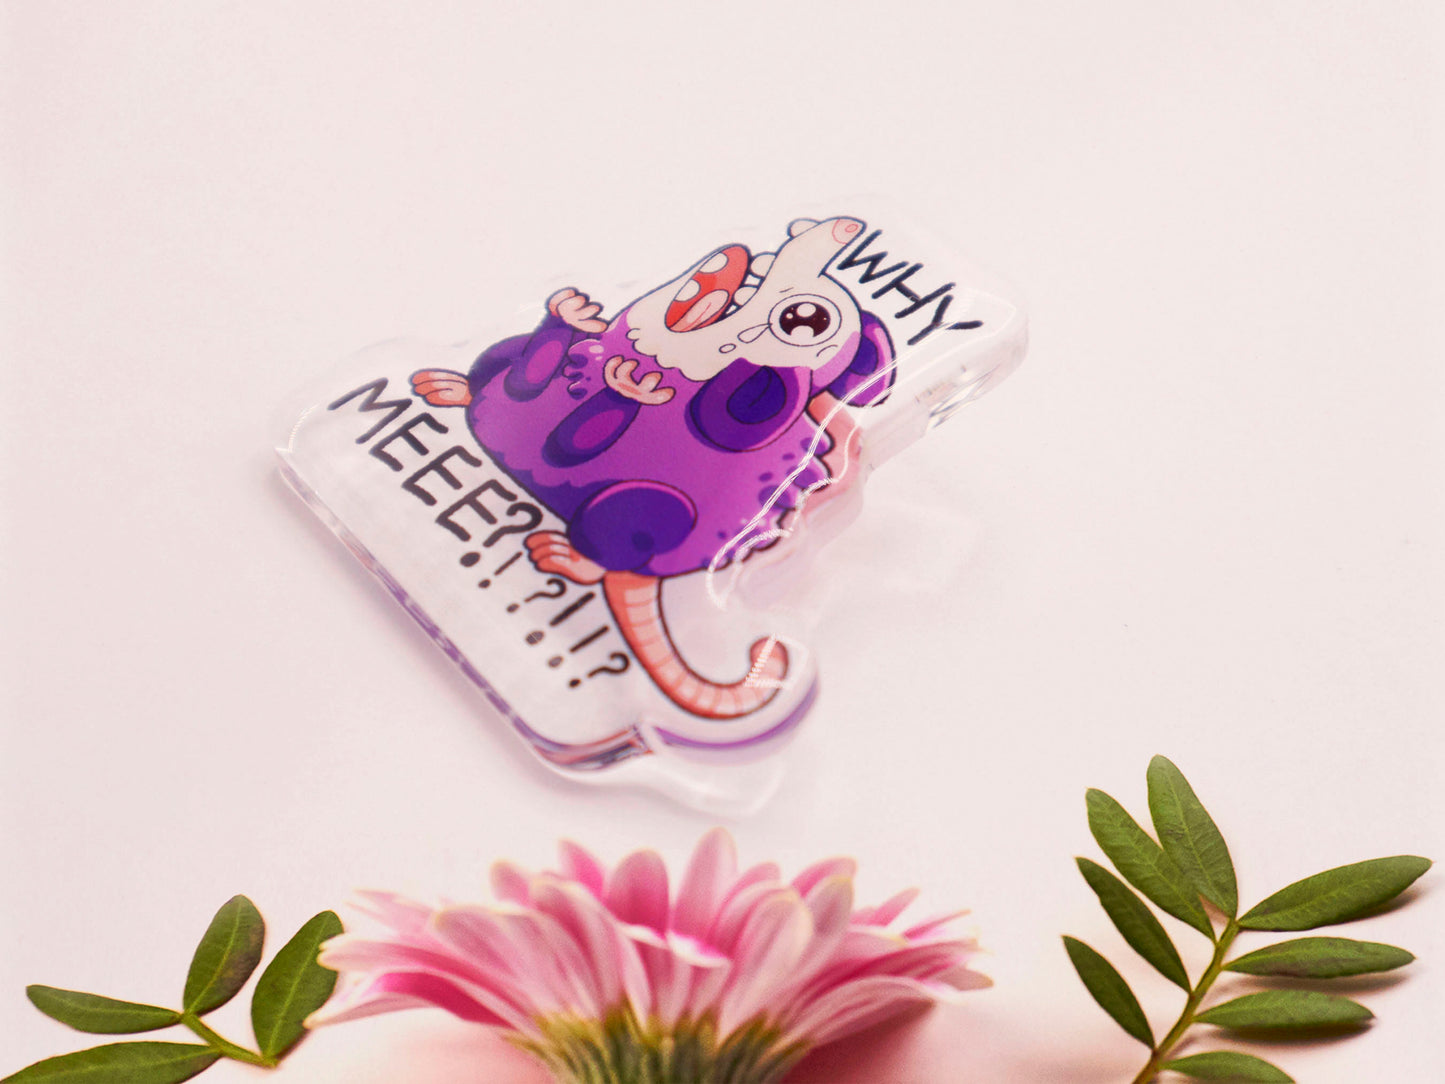 Acrylic pin badge of a crying and screaming possum with the text why me?!